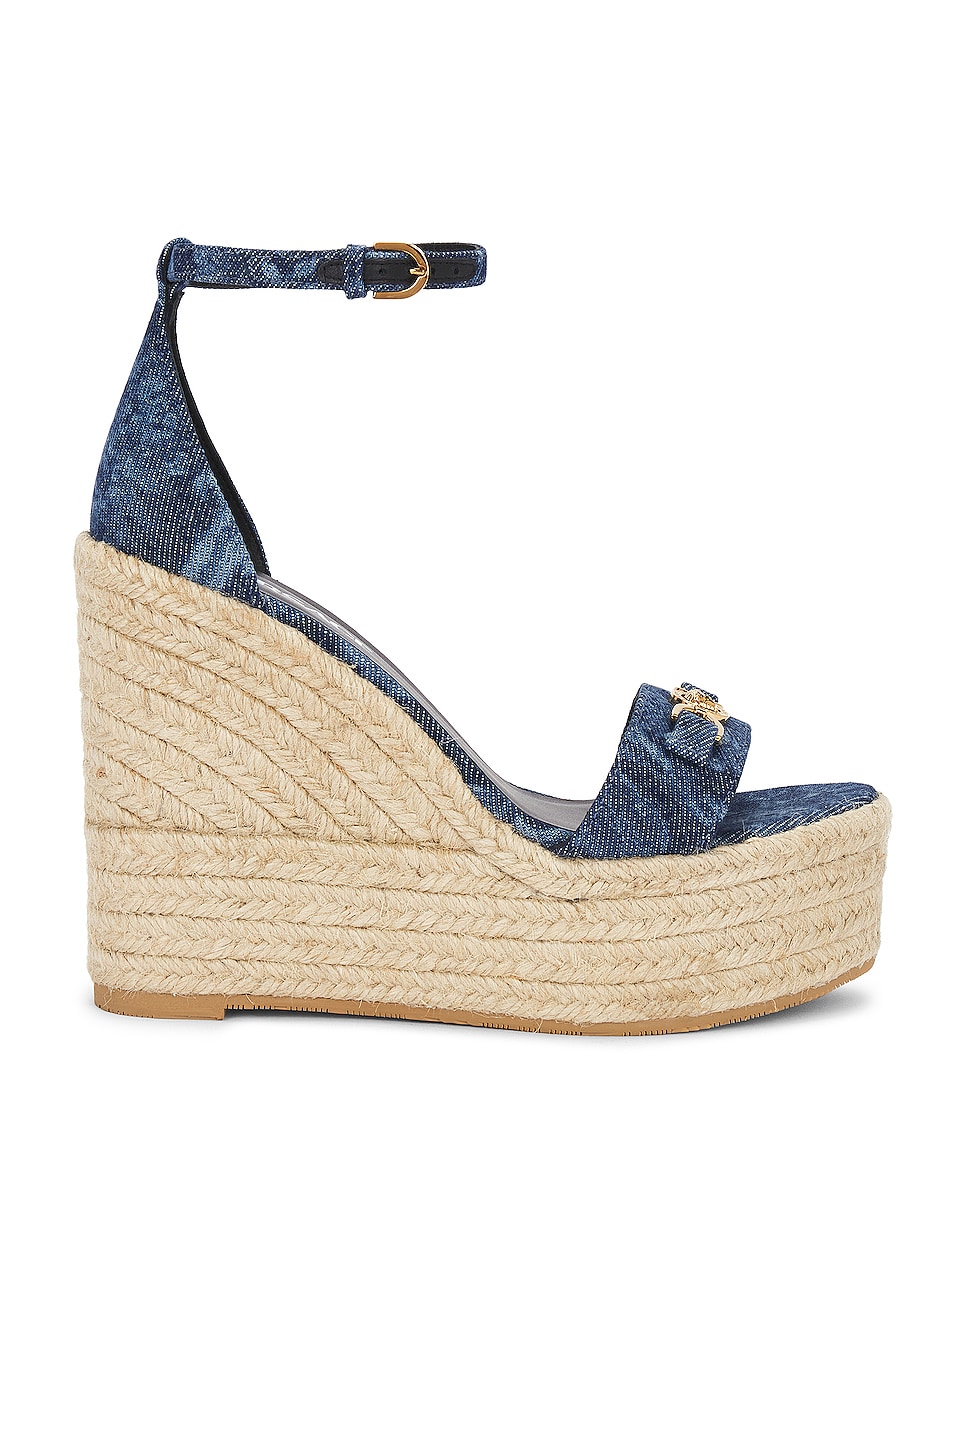 Image 1 of VERSACE Fabric Wedge Espadrille Sandal in Blue